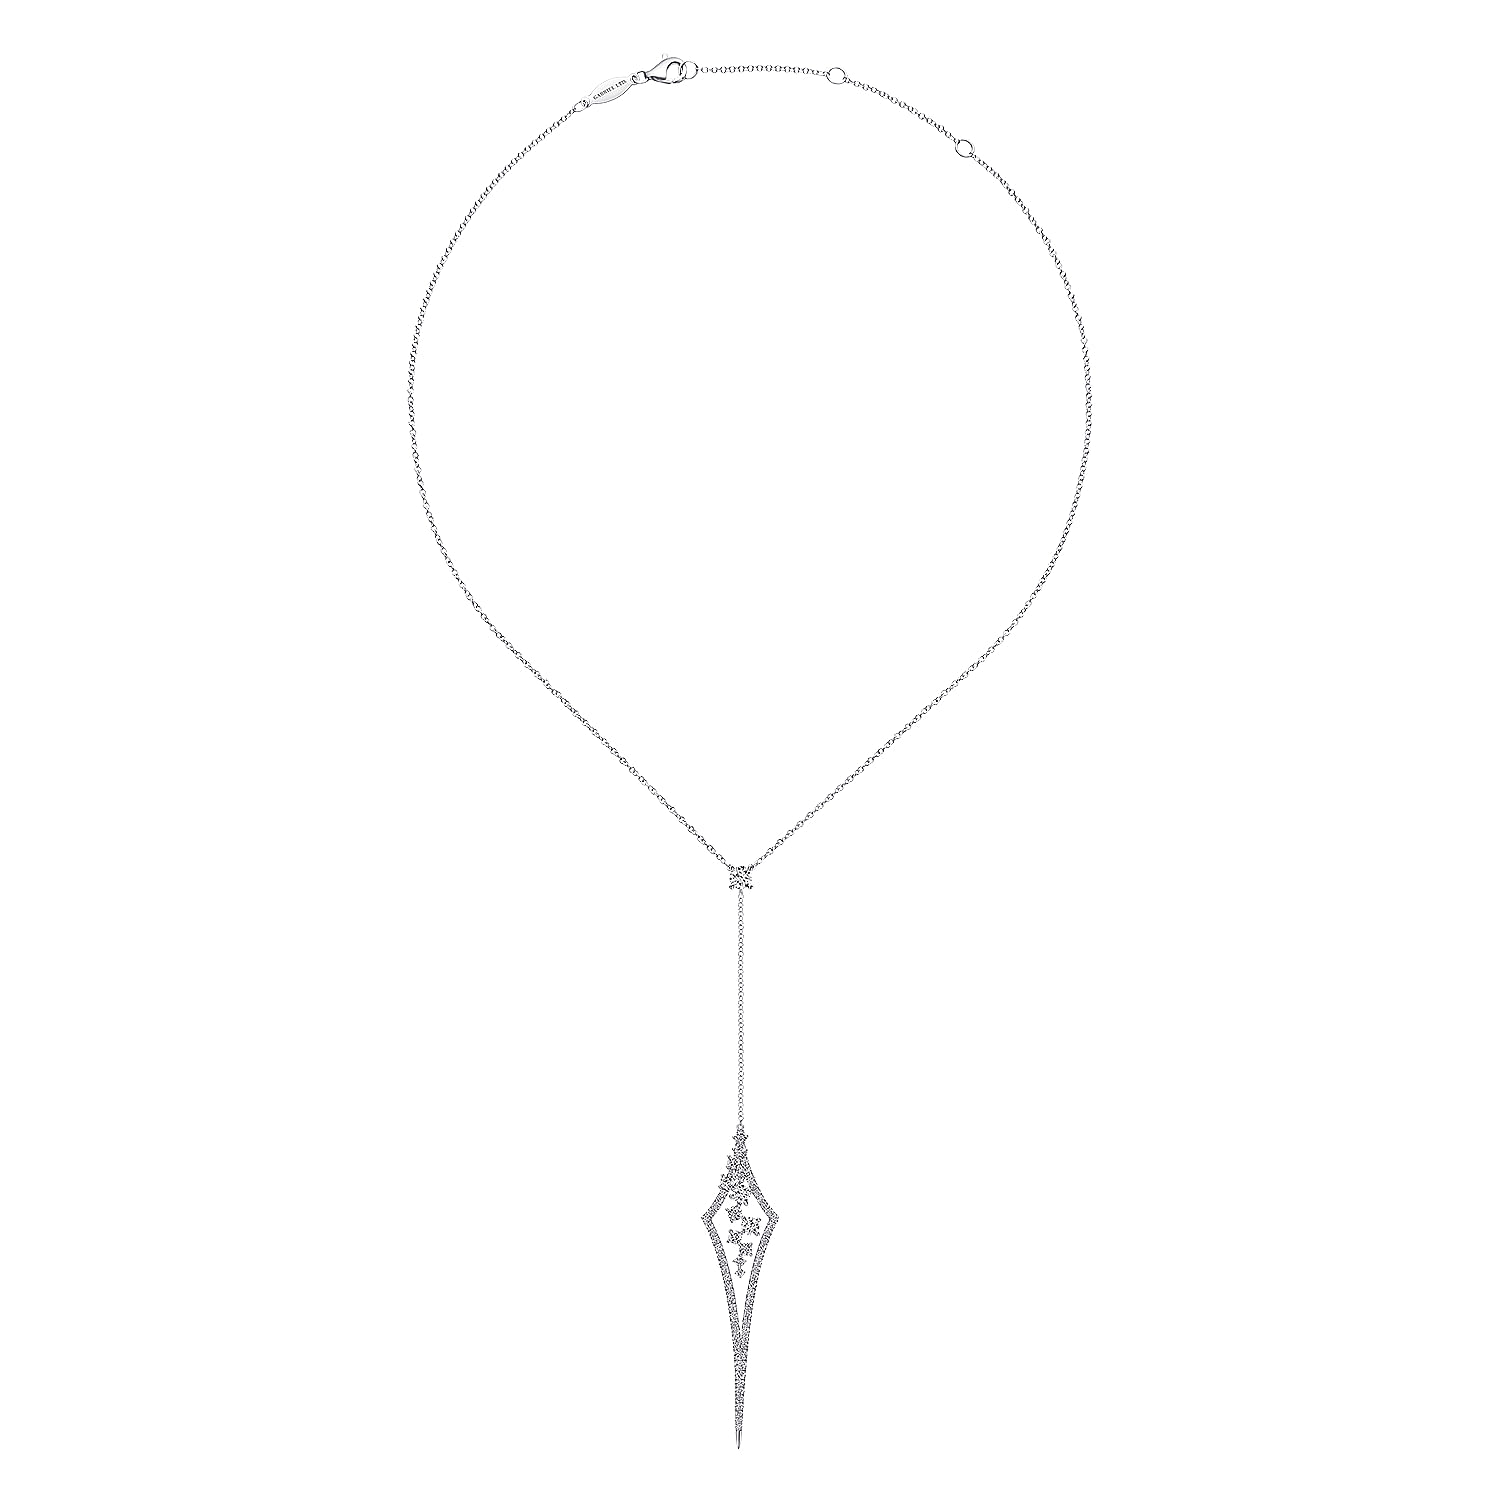 18K White Gold Y Necklace with Cluster Diamond Kite Pendant